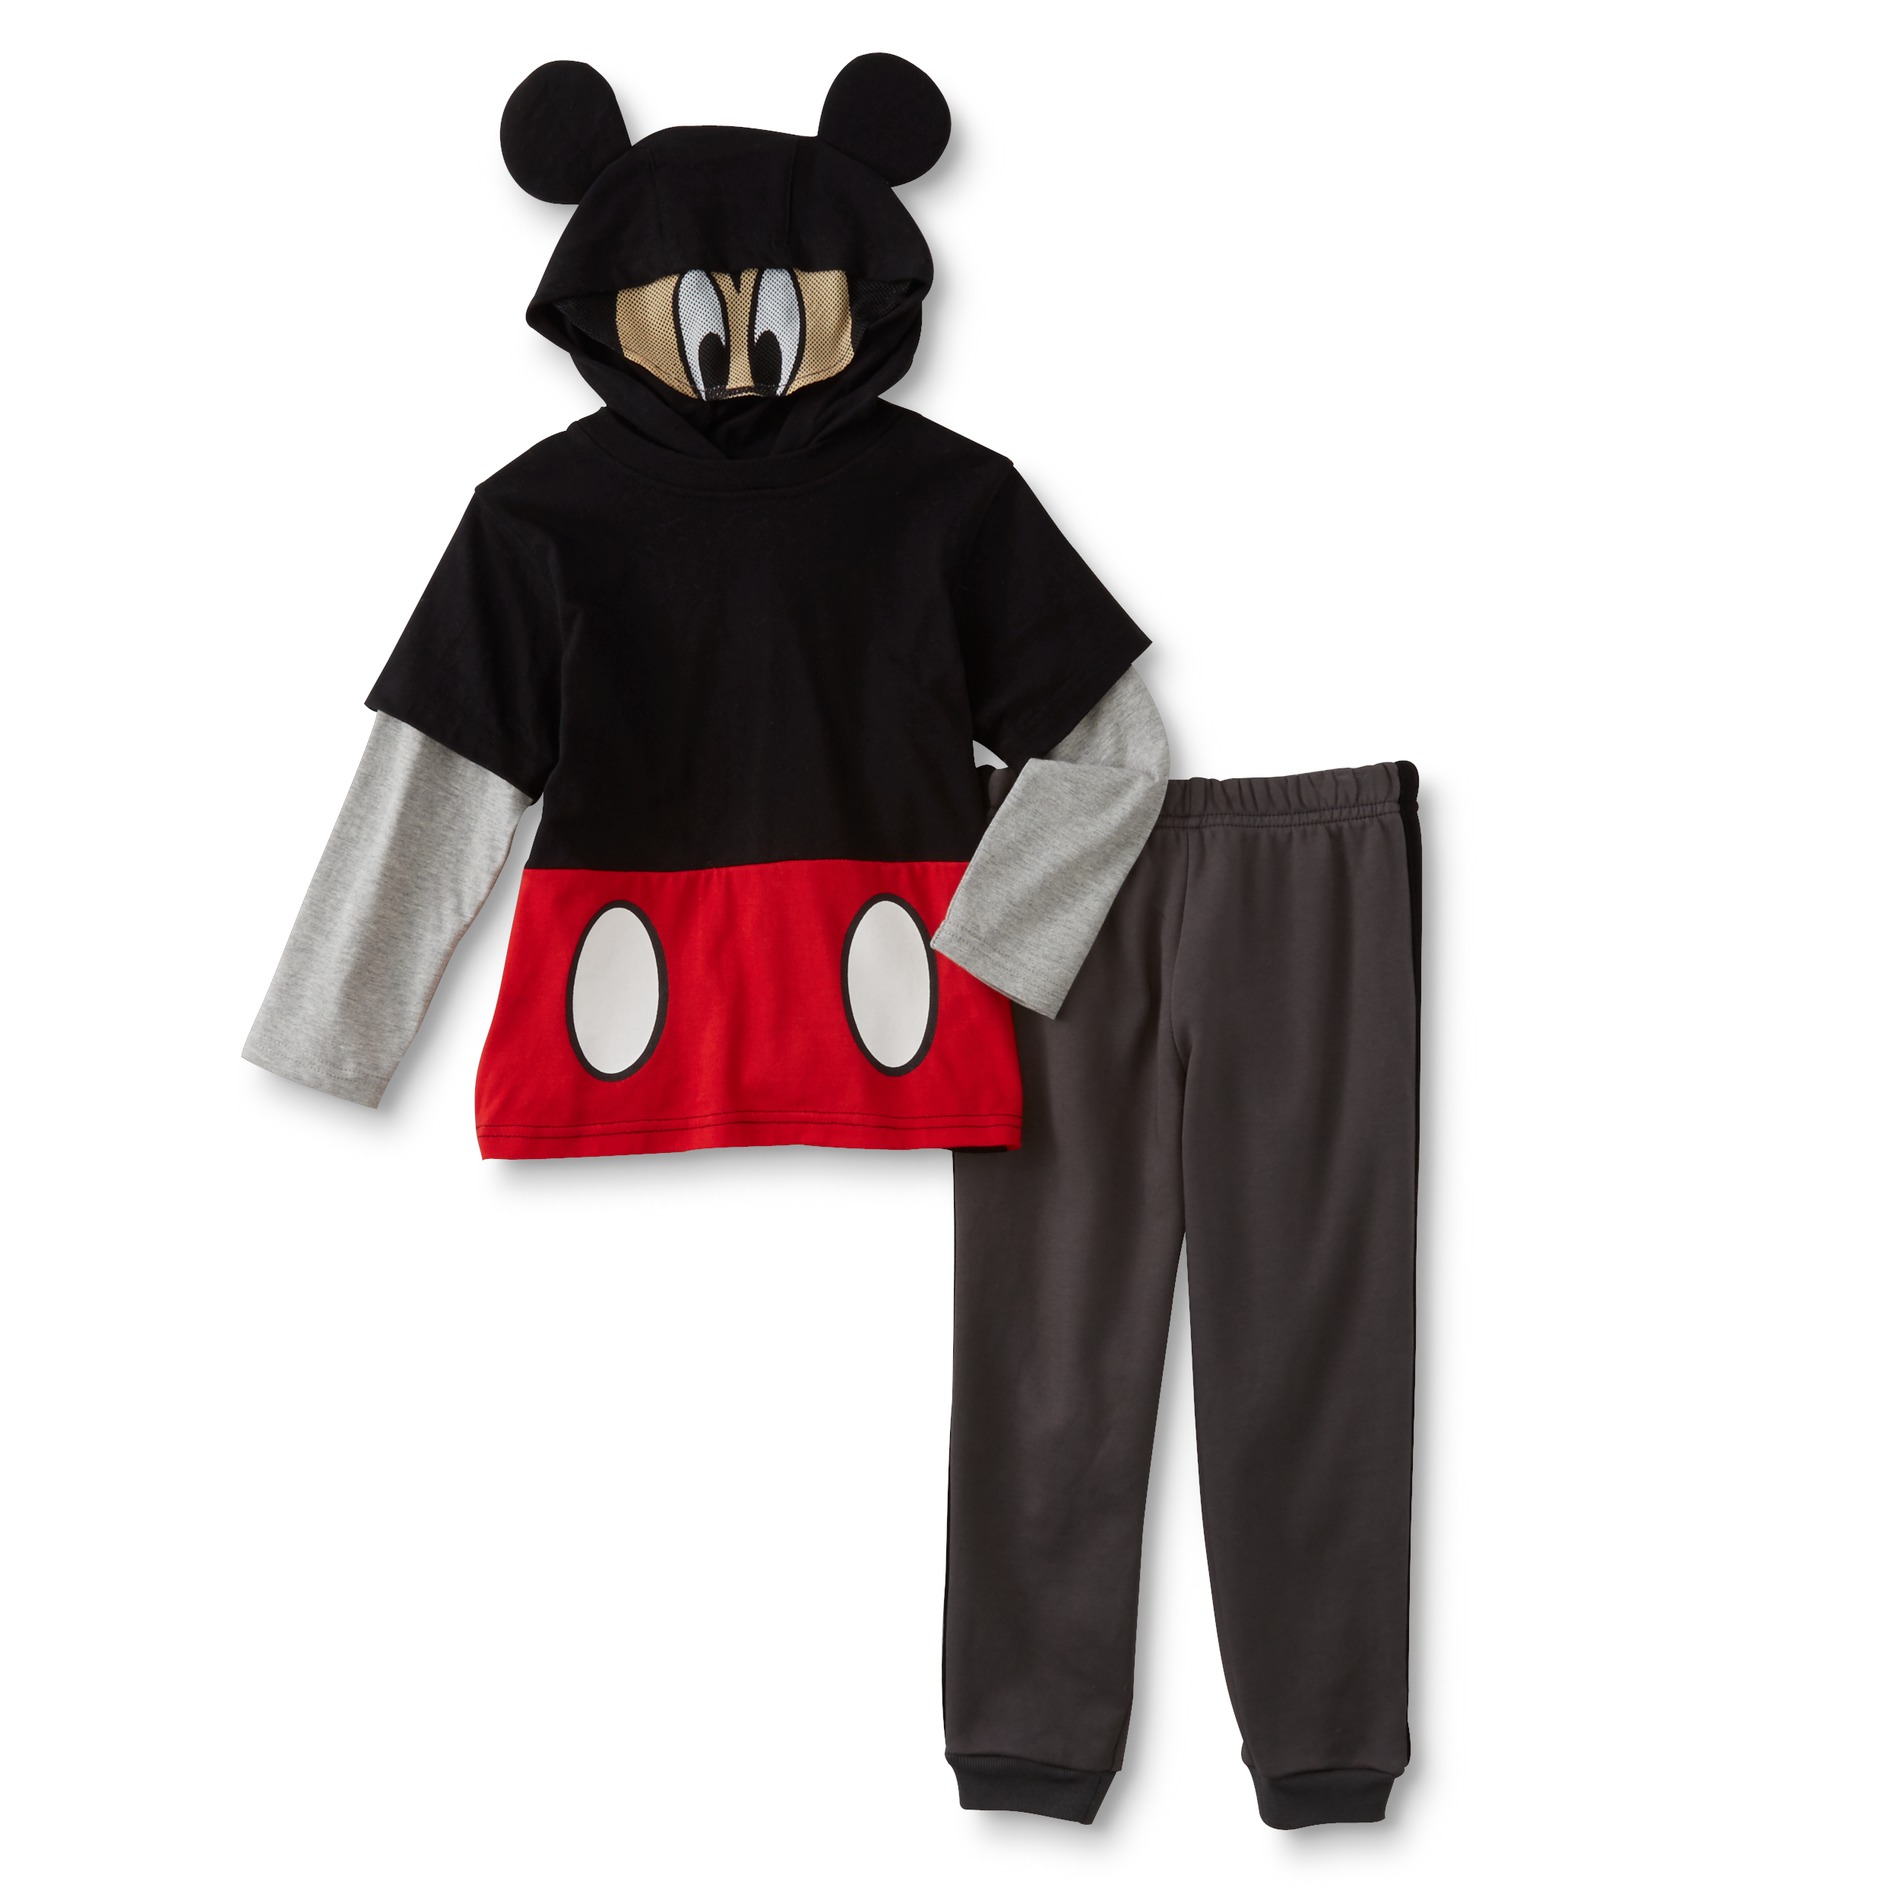 Disney Mickey Mouse Infant & Toddler Boy's Hooded Costume Shirt & Pants - Black